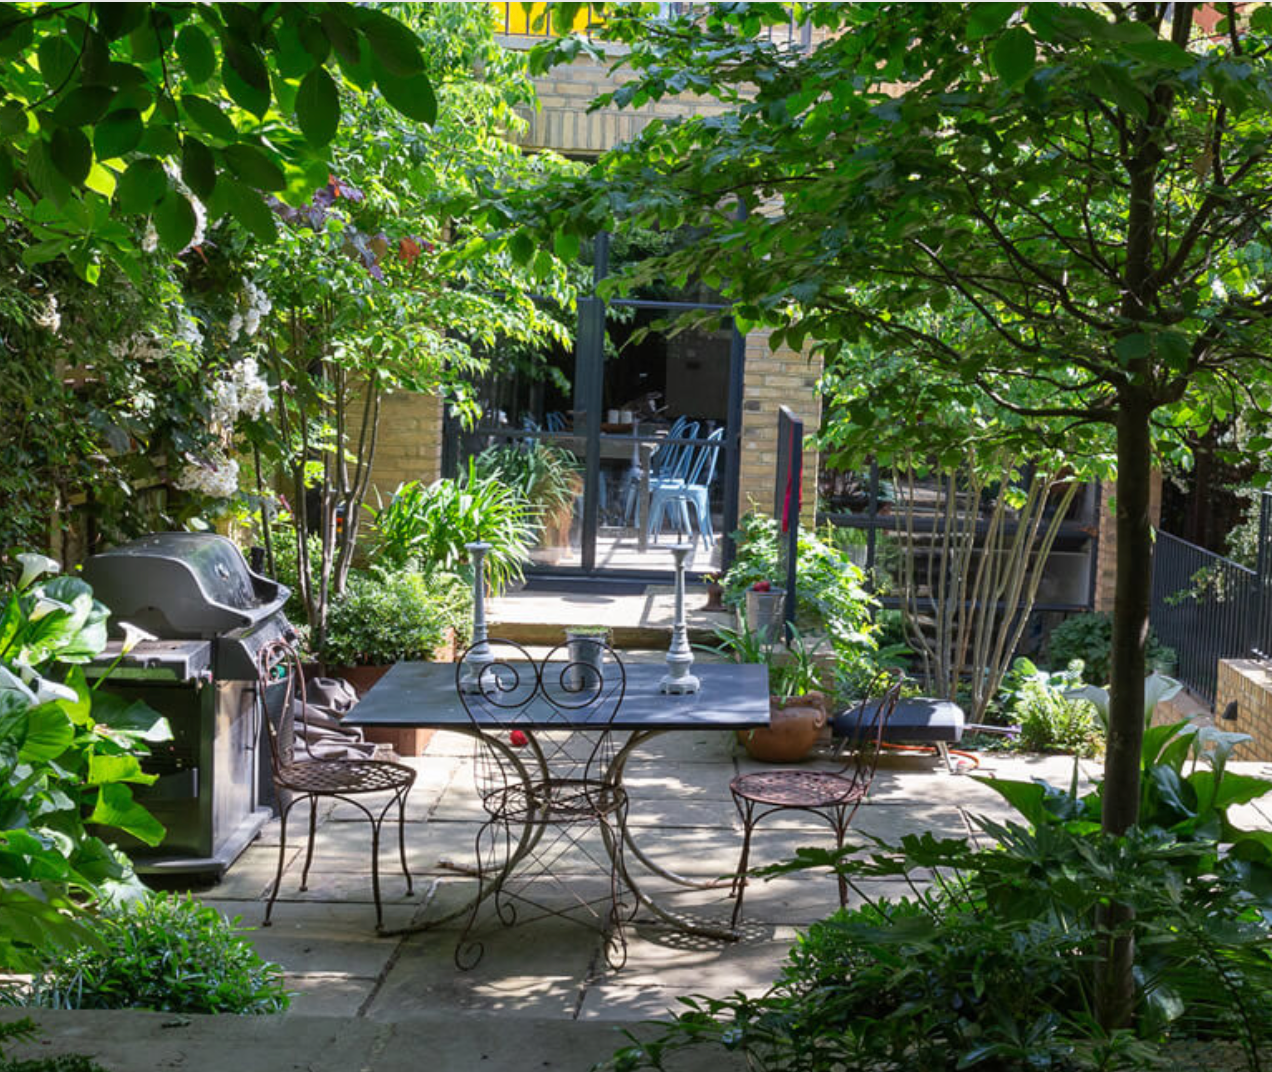 What are the best plants for a shady patio in the UK?